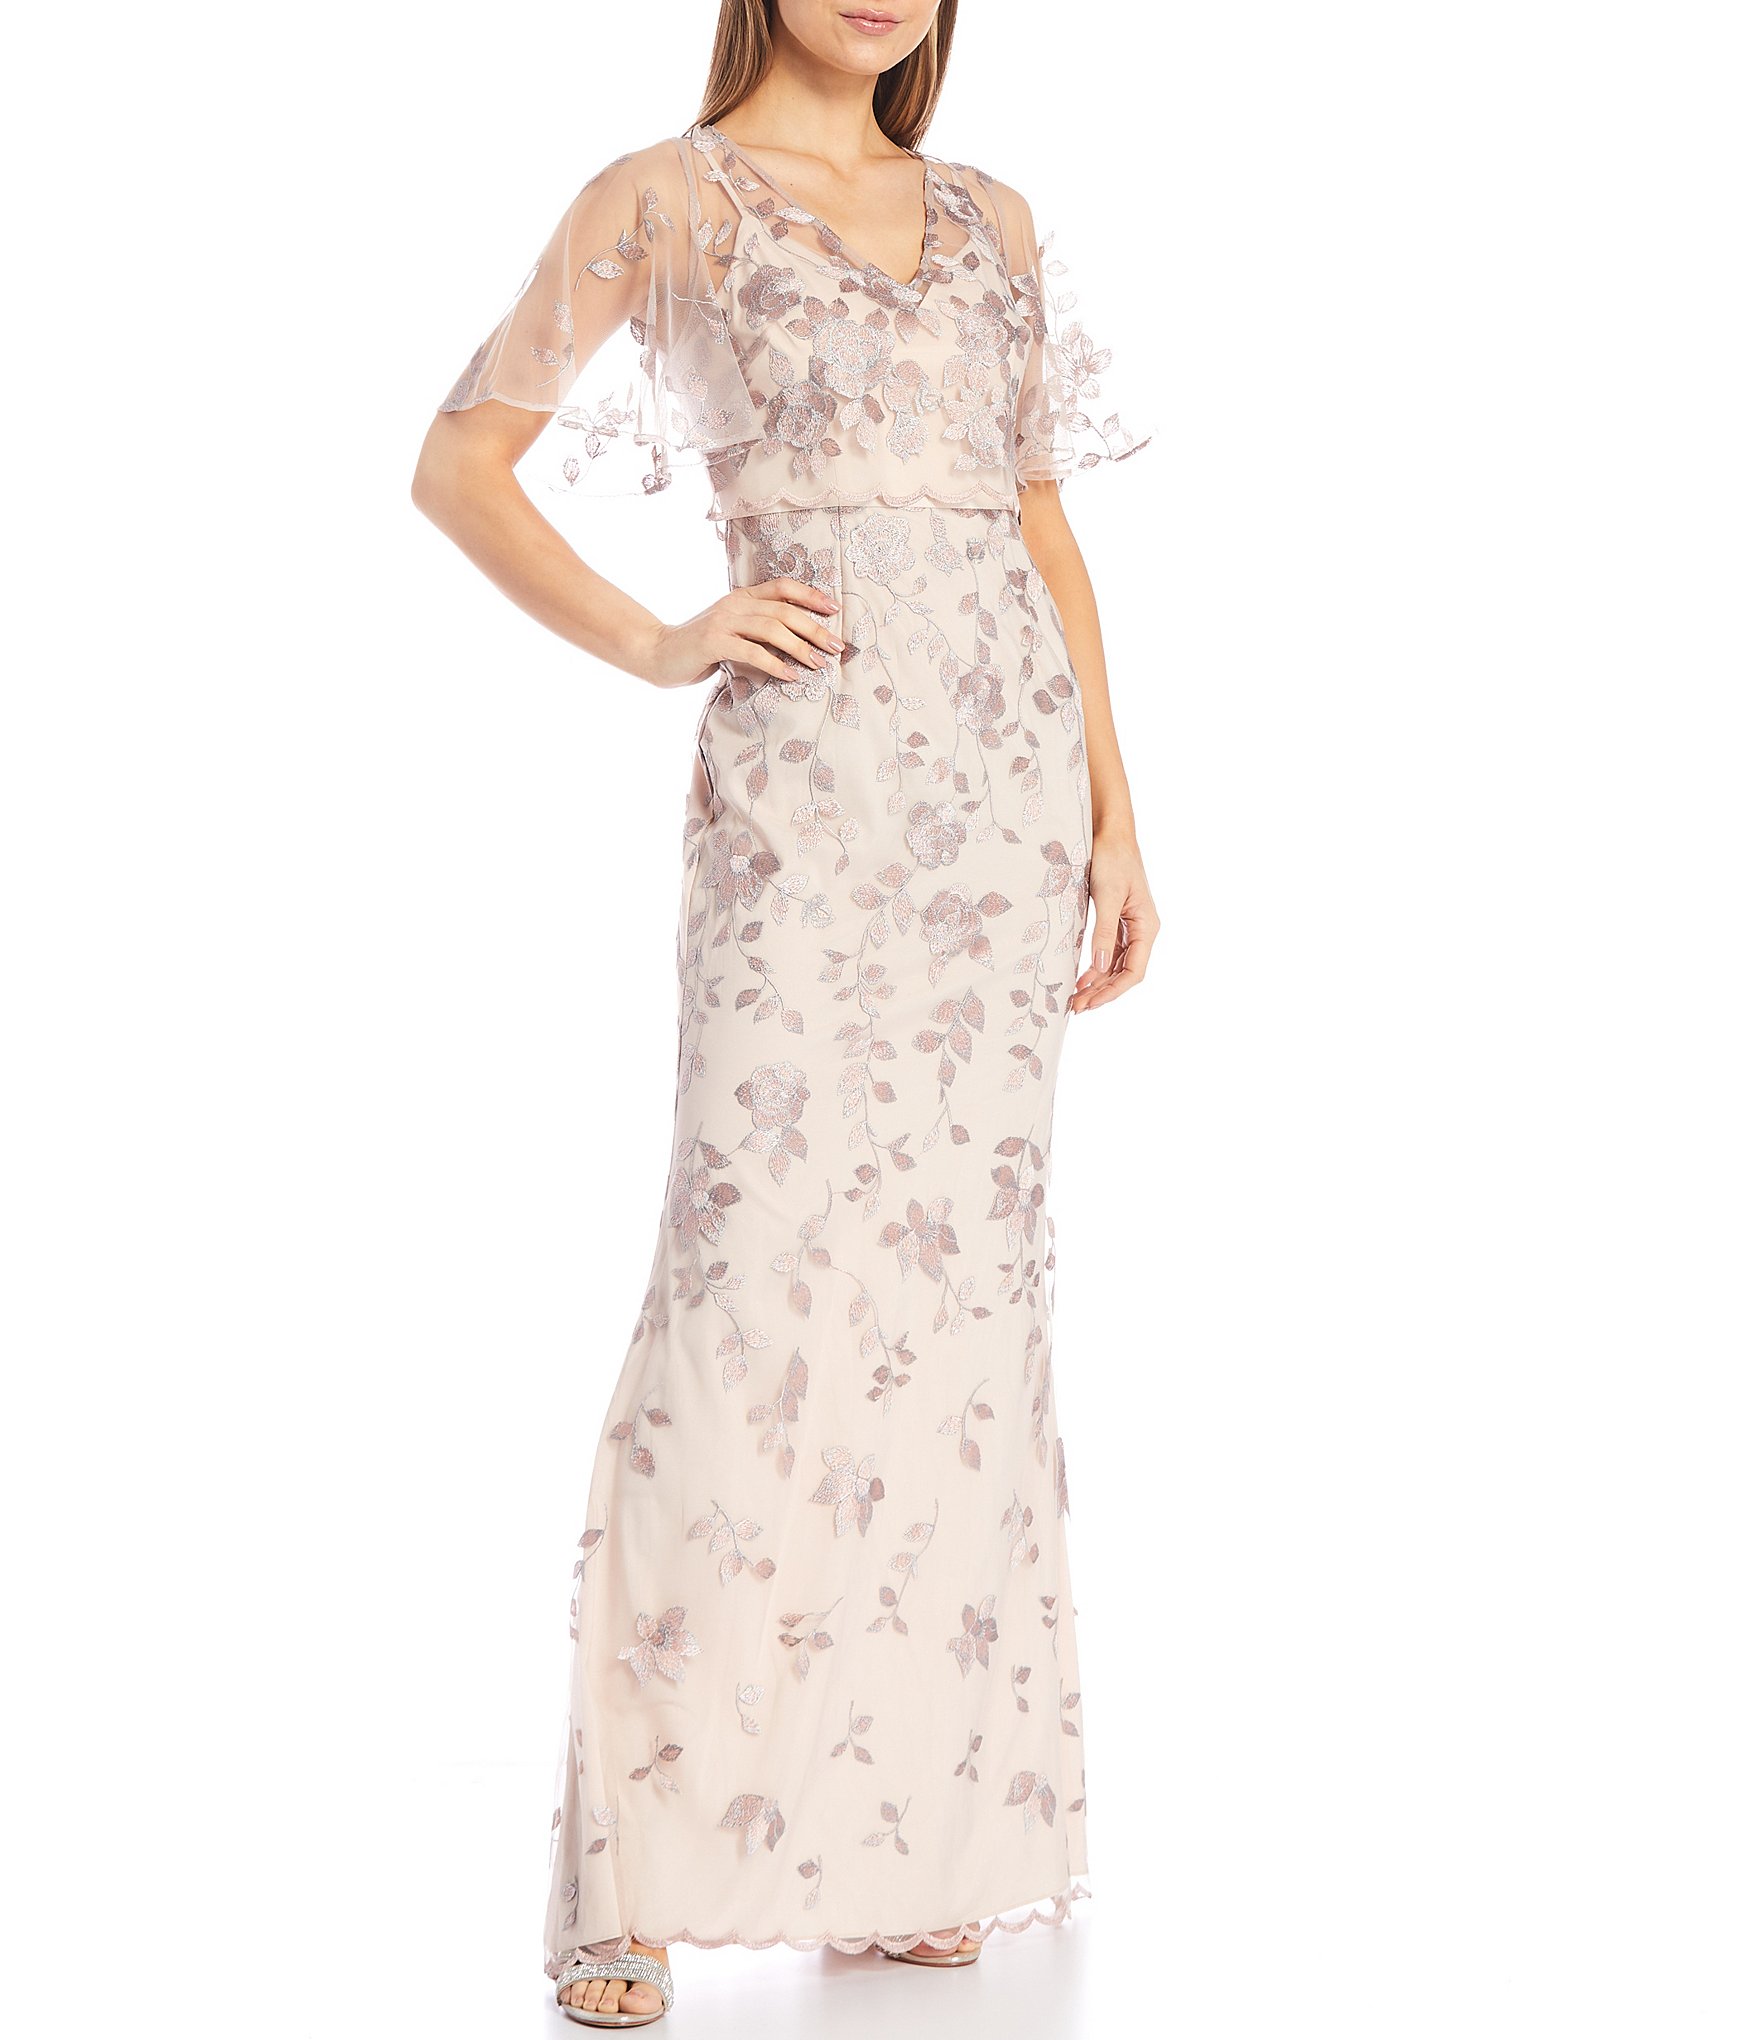 adrianna papell floral gown | Dresses Images 2022